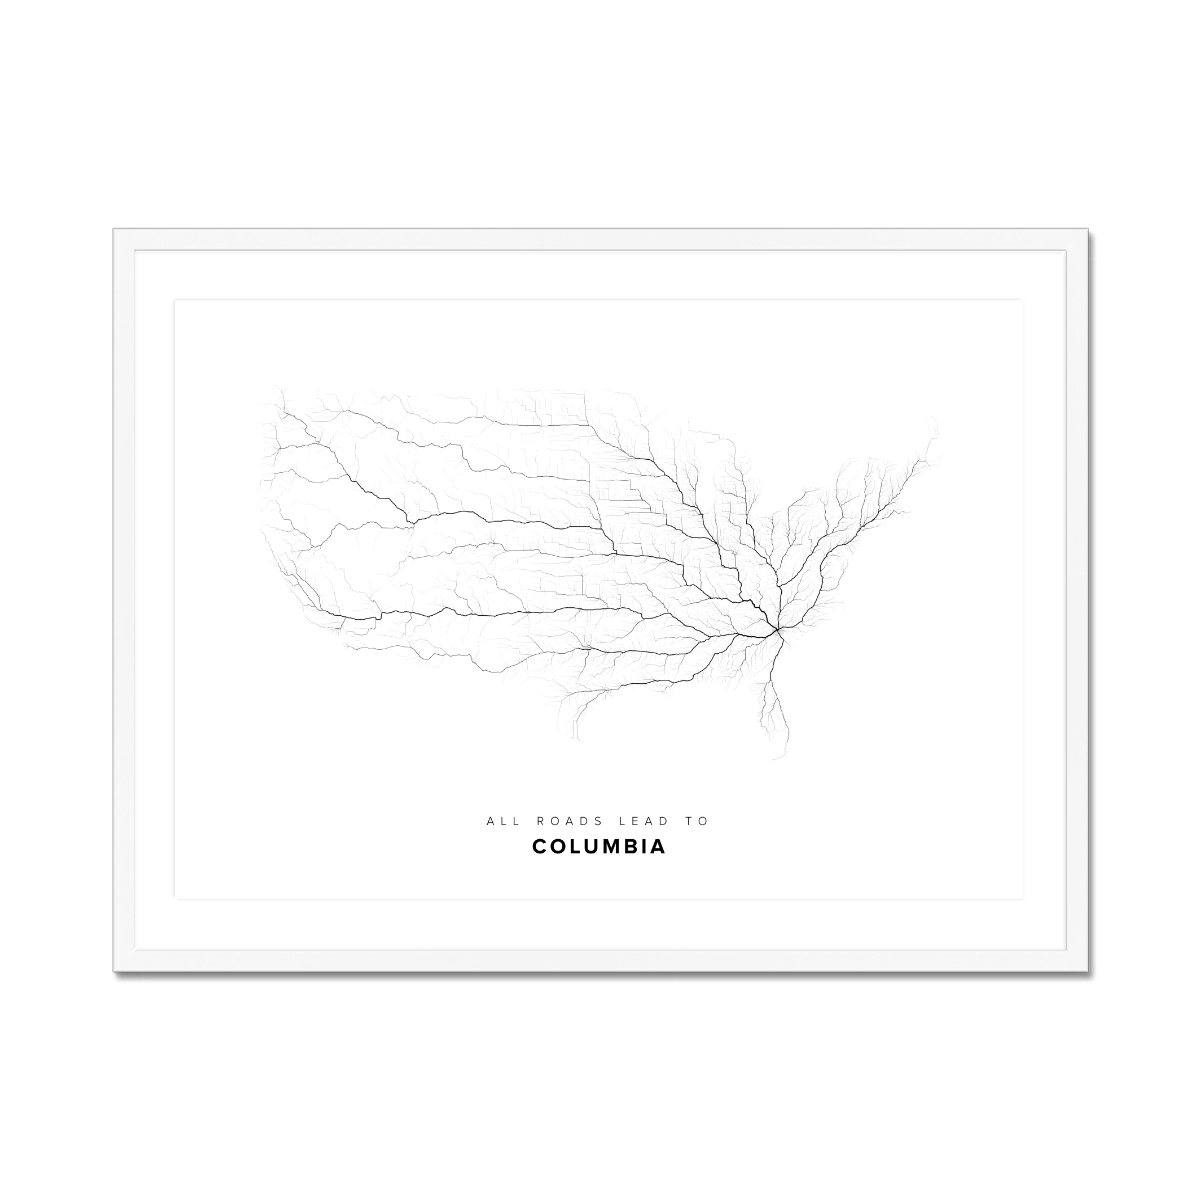 All roads lead to Columbia (United States of America) Fine Art Map Print